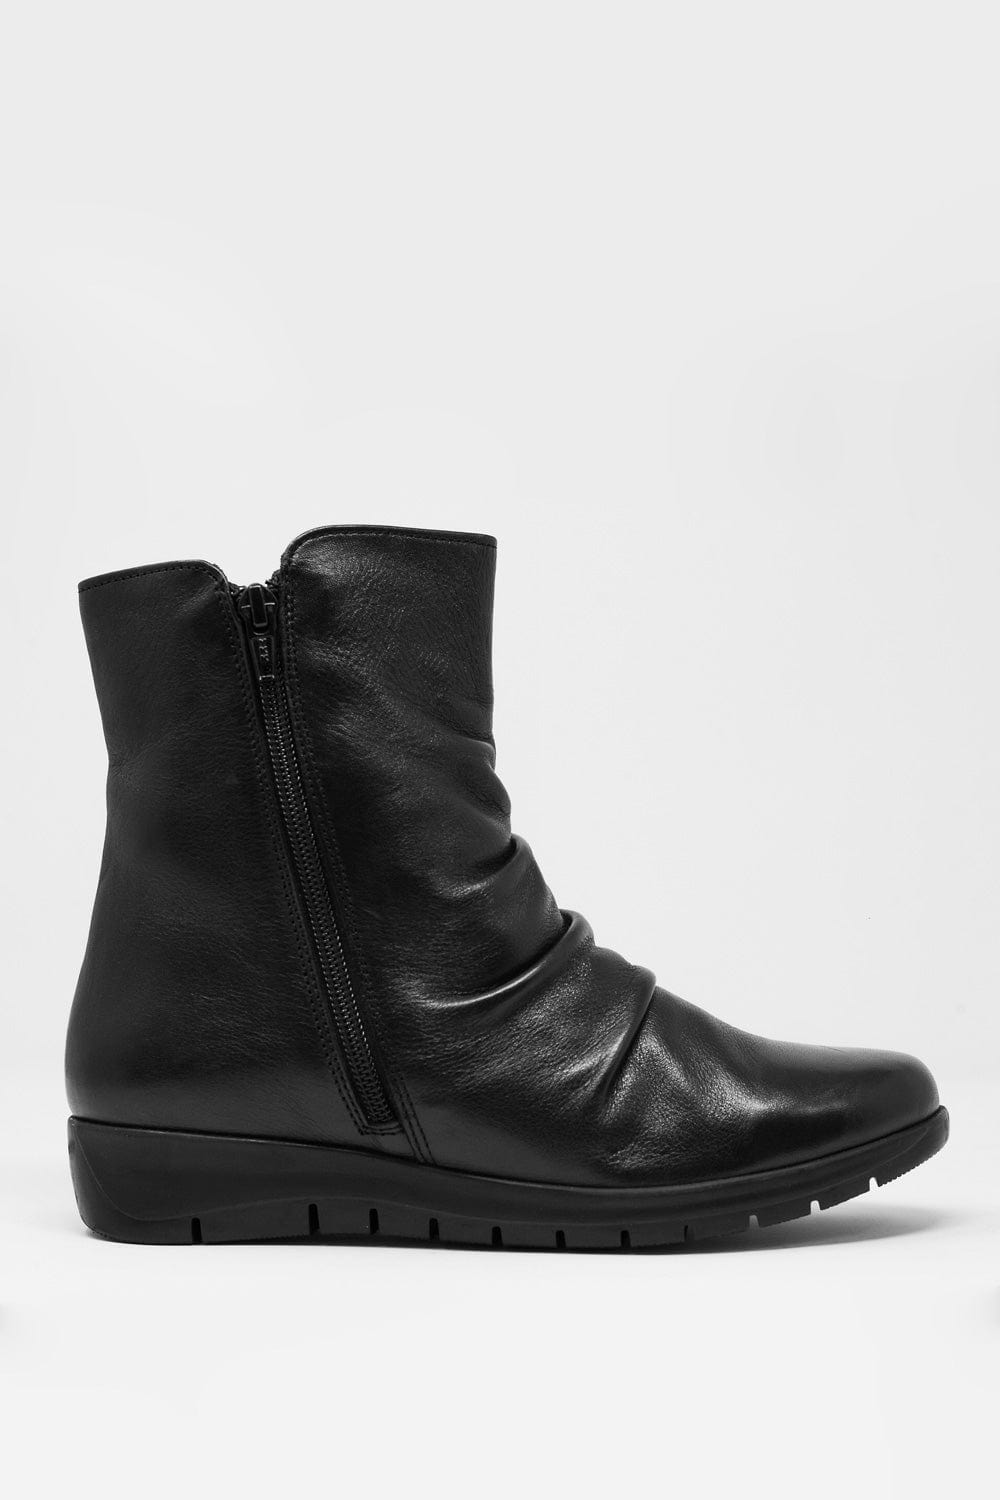 Q2 Women's Boots Low Black Boots with Zipper and Round Nose